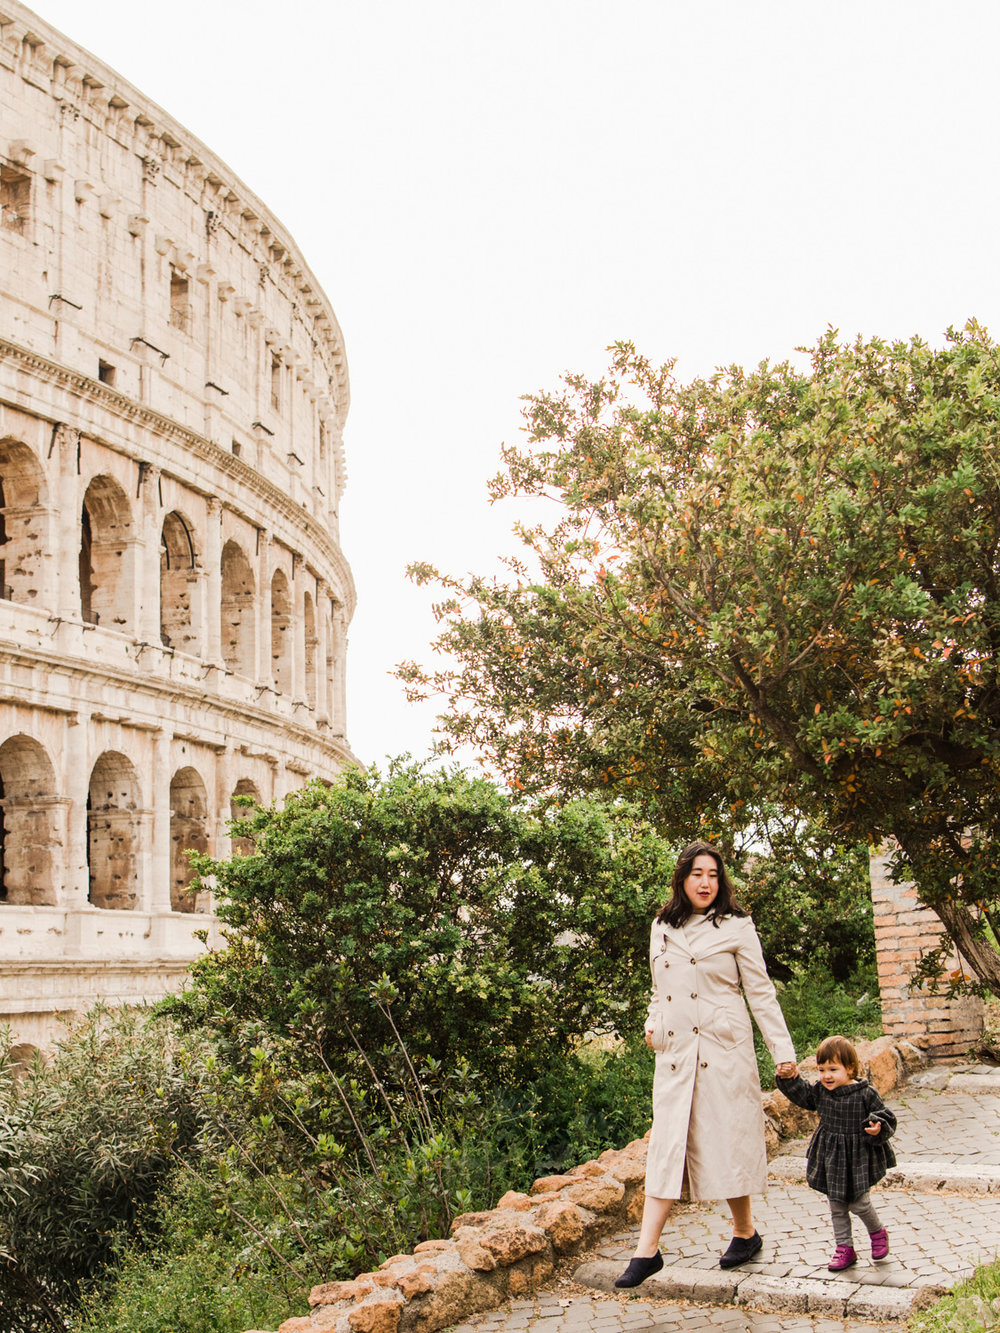 Lisa loved climbing the stairs behind the roman colosseum while we slow traveled in Italy.